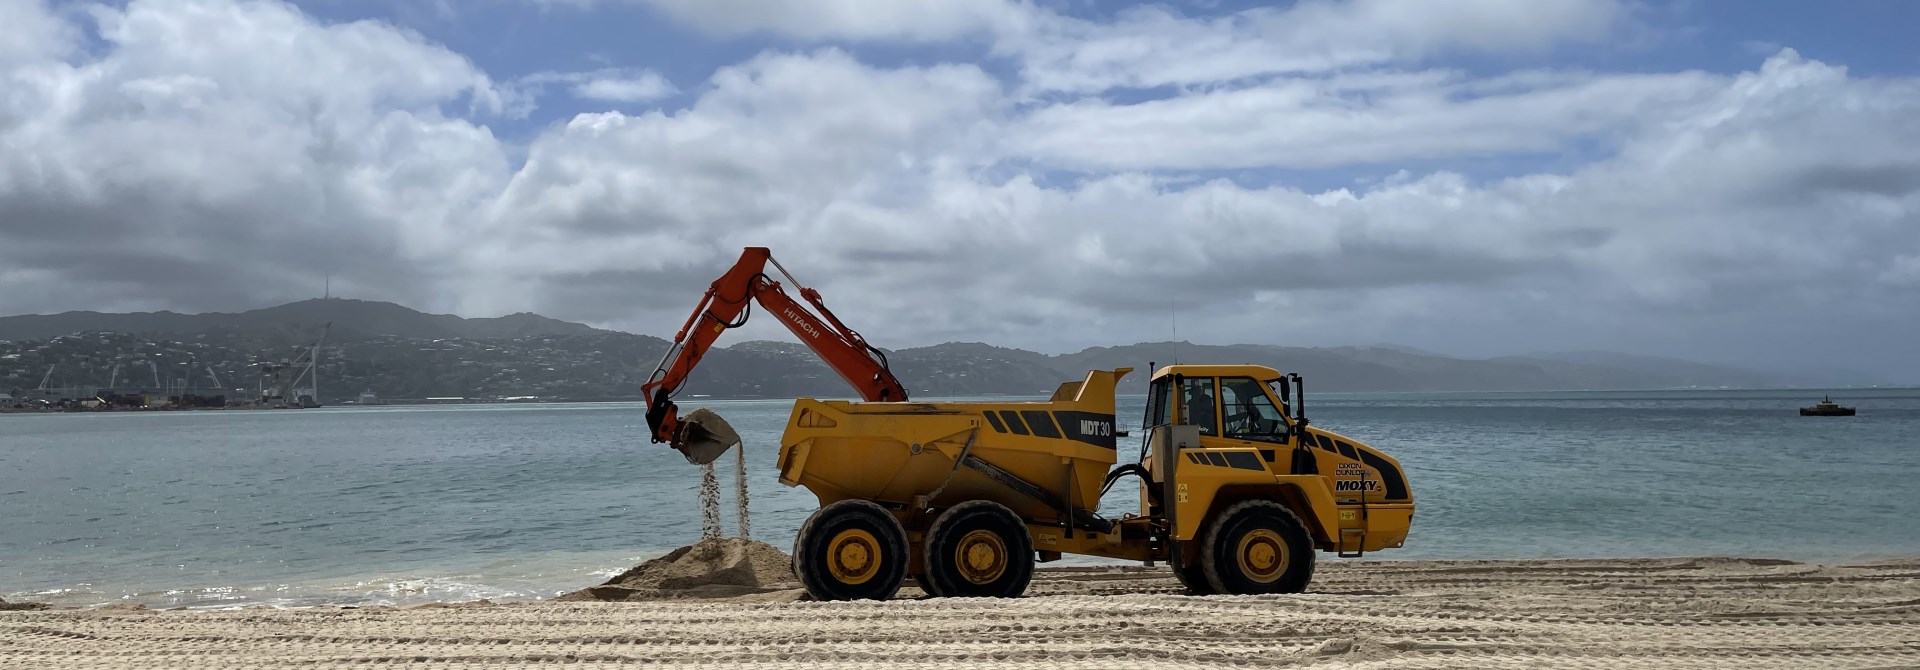 A yellow digger truck scooping up sand on the beach by the shoreline, with the water and land in distance behind and golden sand in foreground.